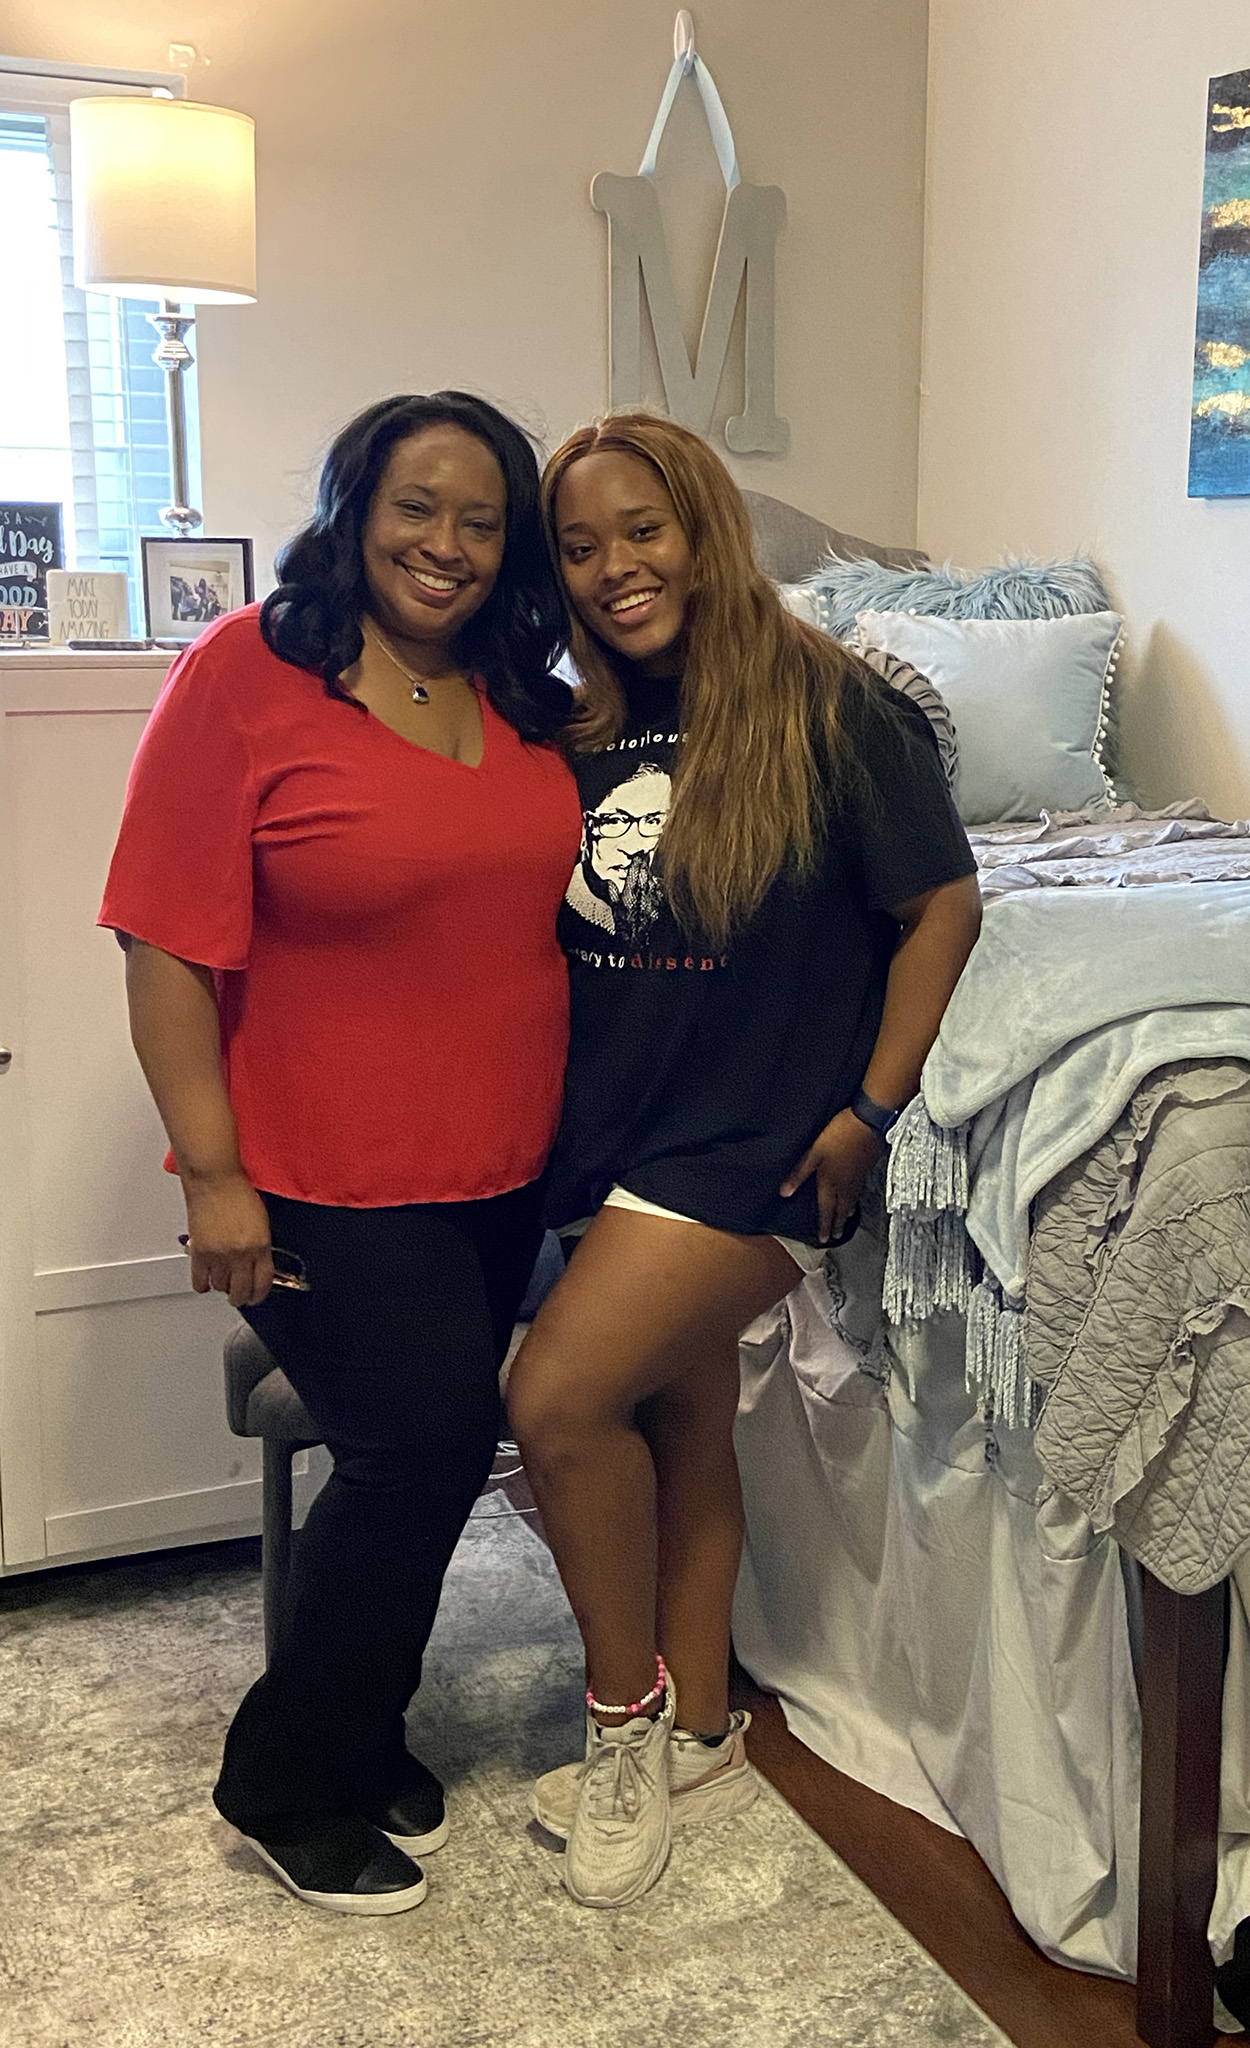 Janelle Minor (right) poses with her mom, Ethel Scurlock, in her residence hall room at the university. Submitted photo